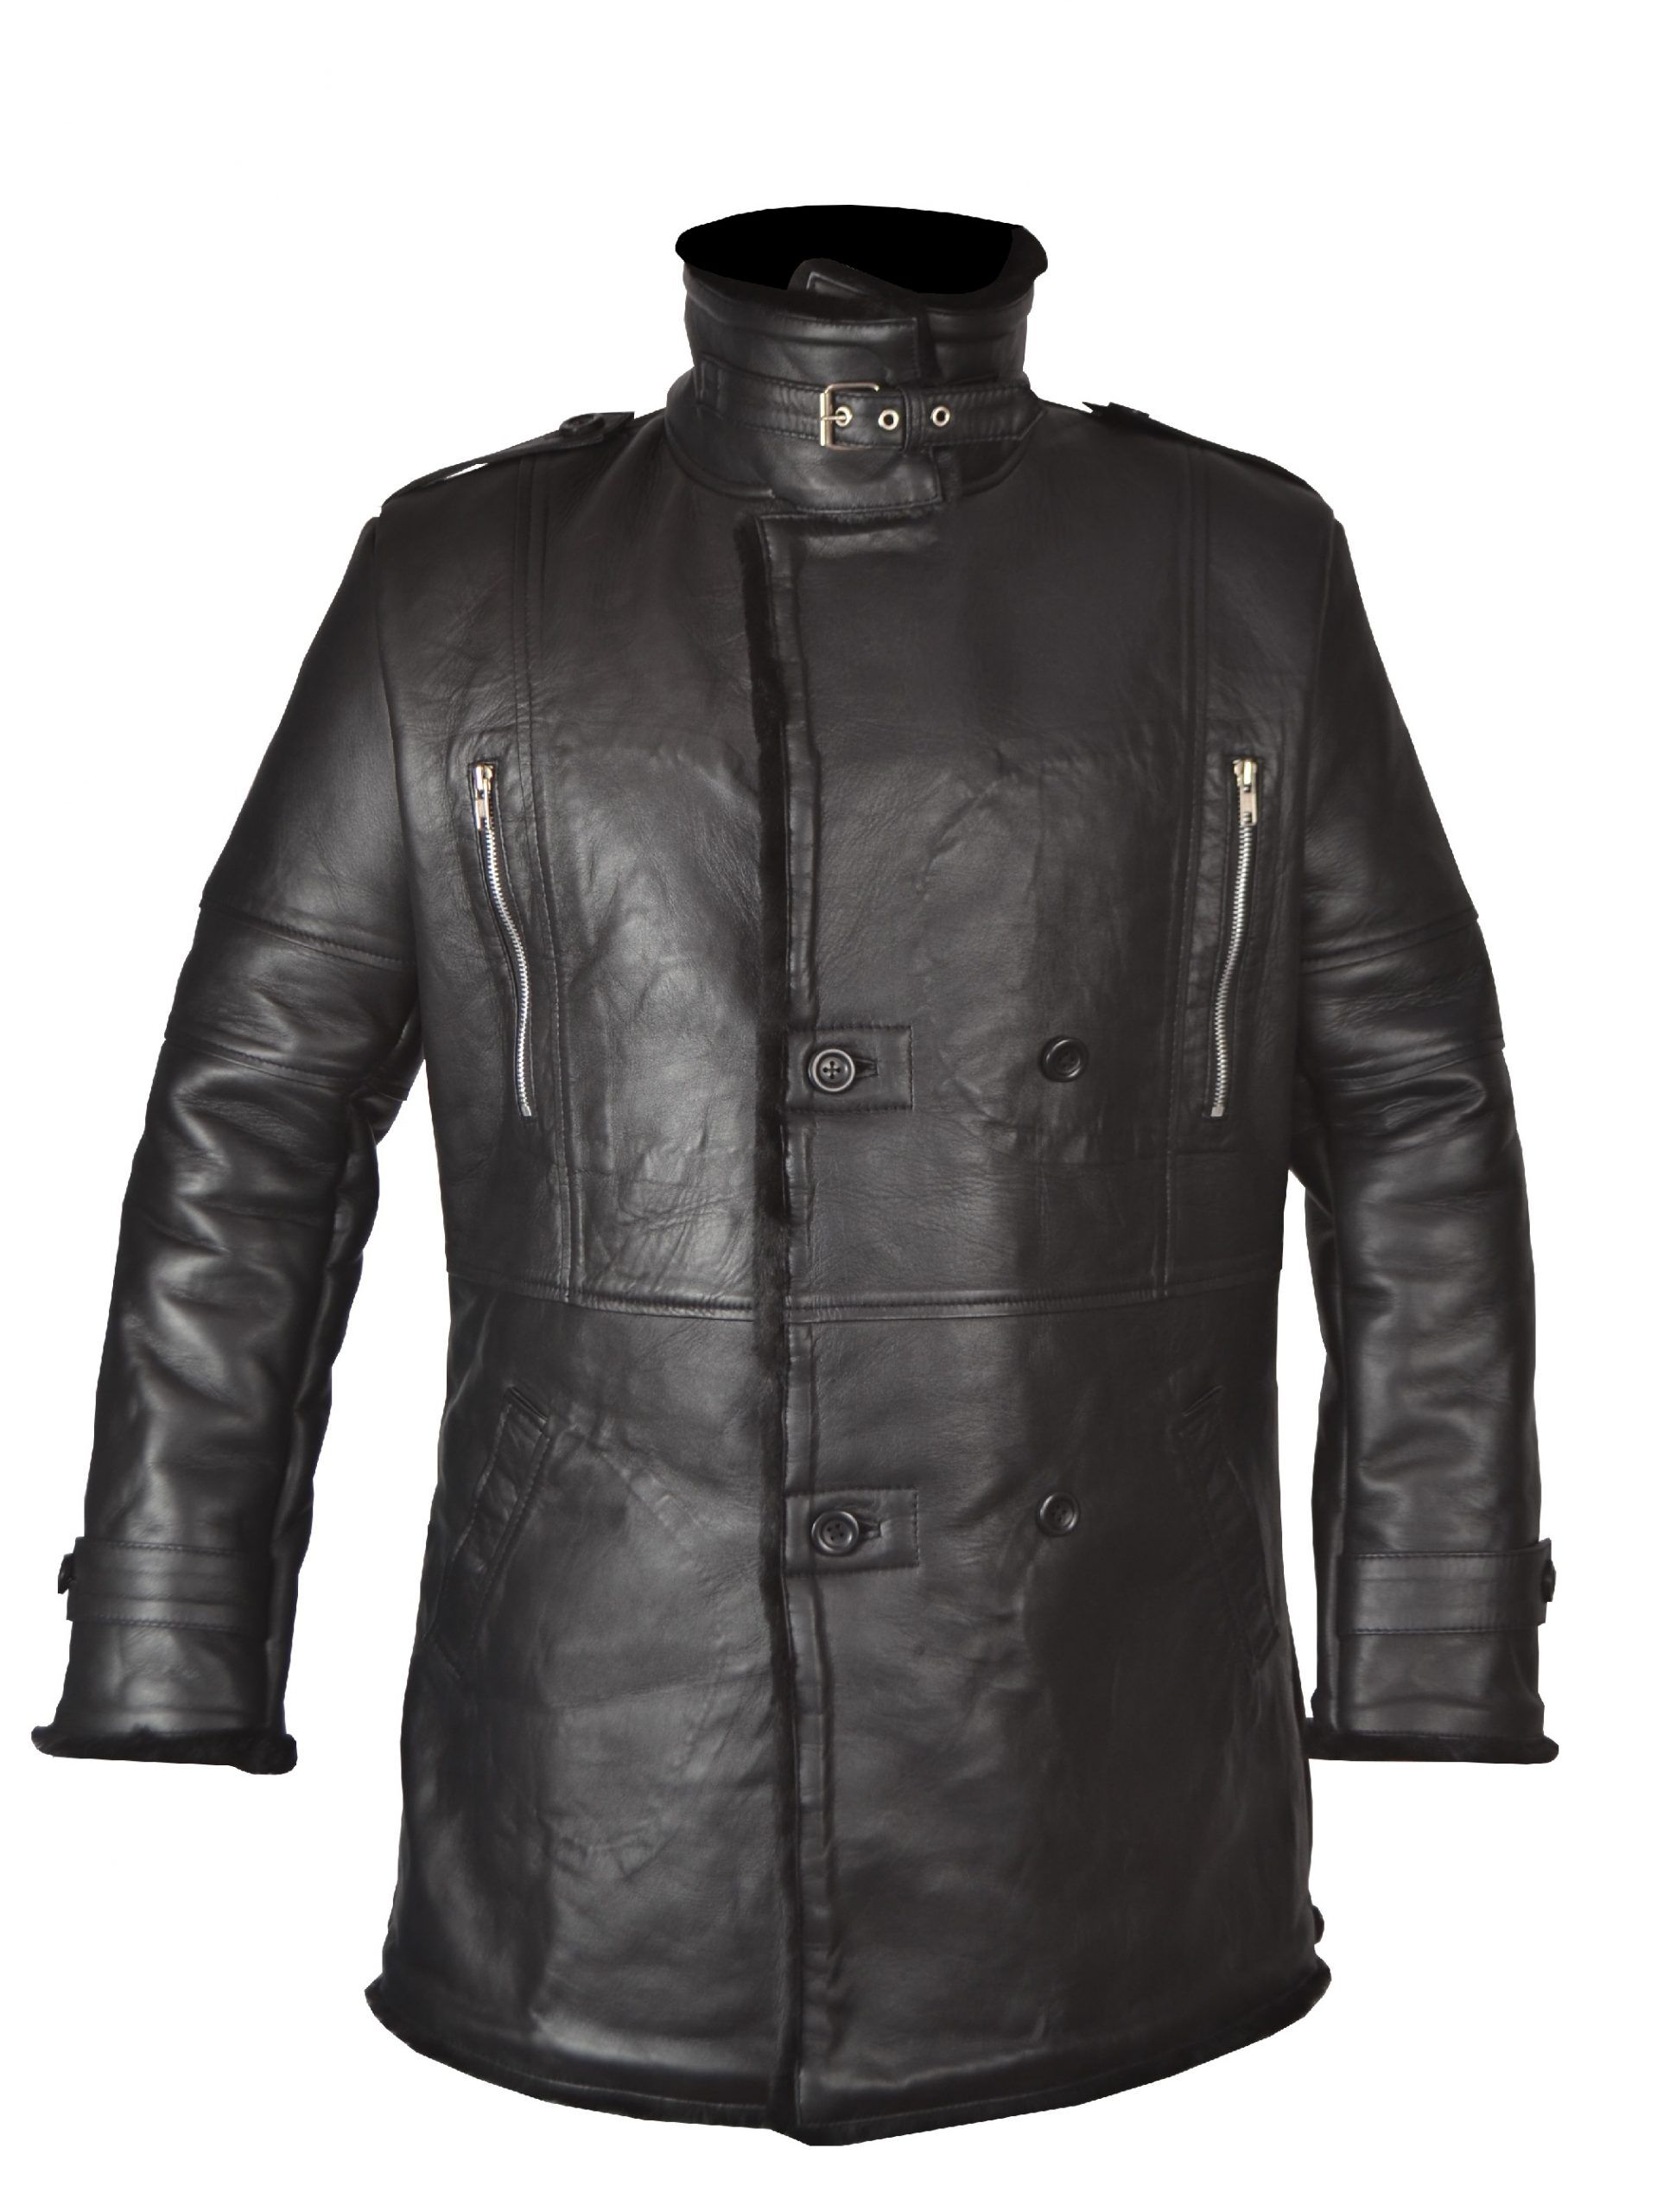 Full Grain Leather Jackets Archives - Leather Jacket Makers